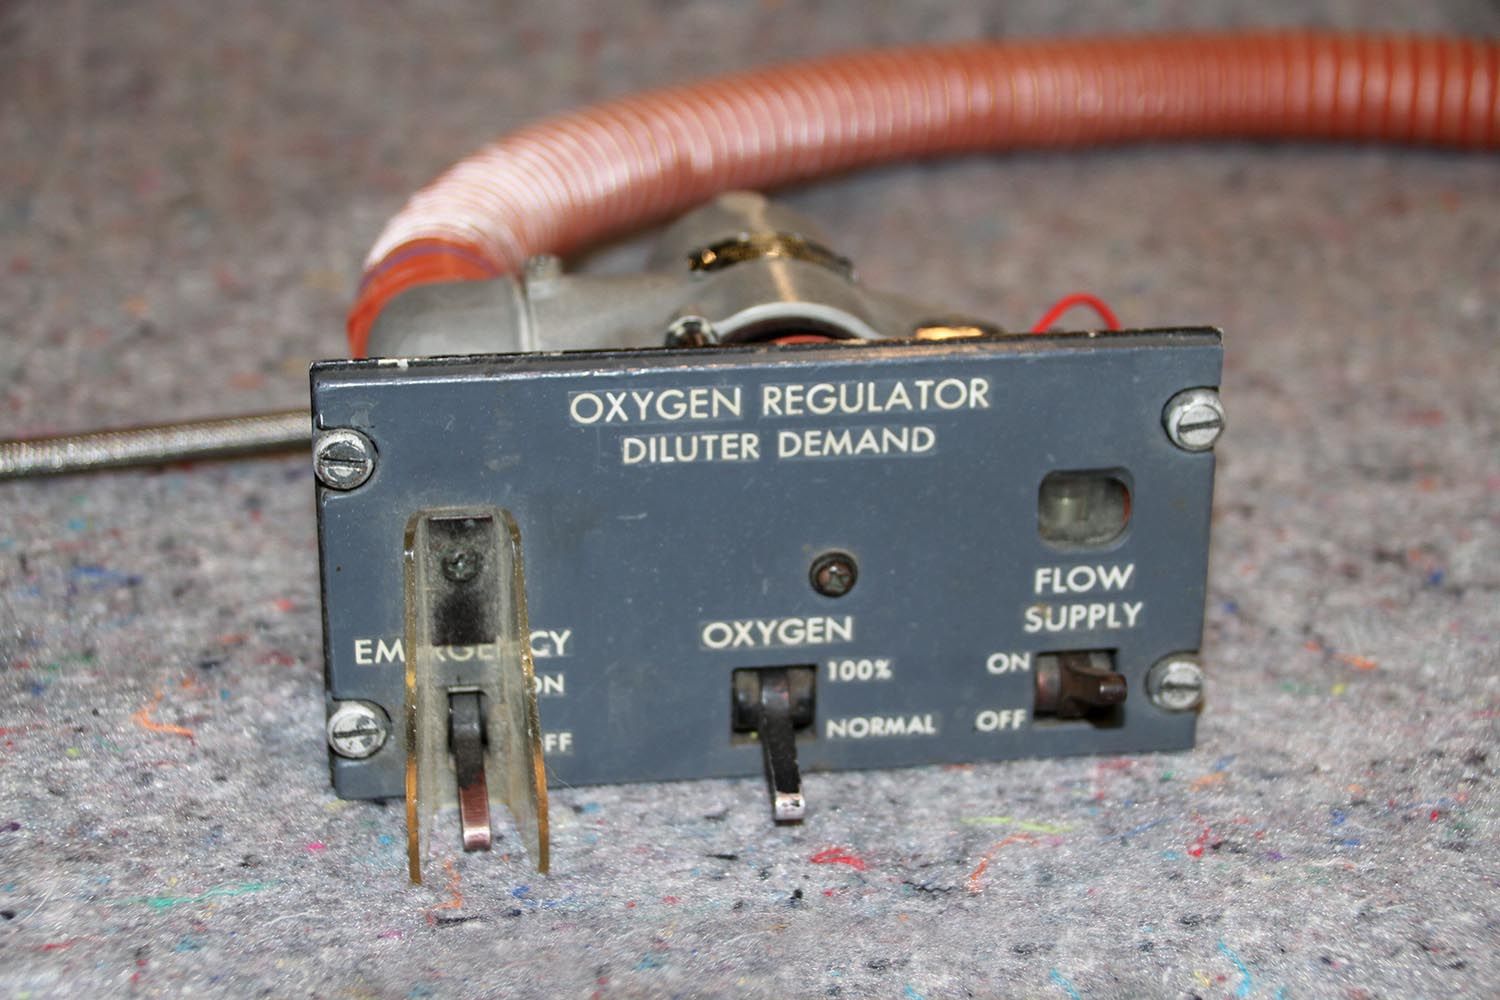 The standard panel-mount dilutor-demand regulator allows you to have either diluted or 100% O2, as well as pressure breathing if you’re going to go high!